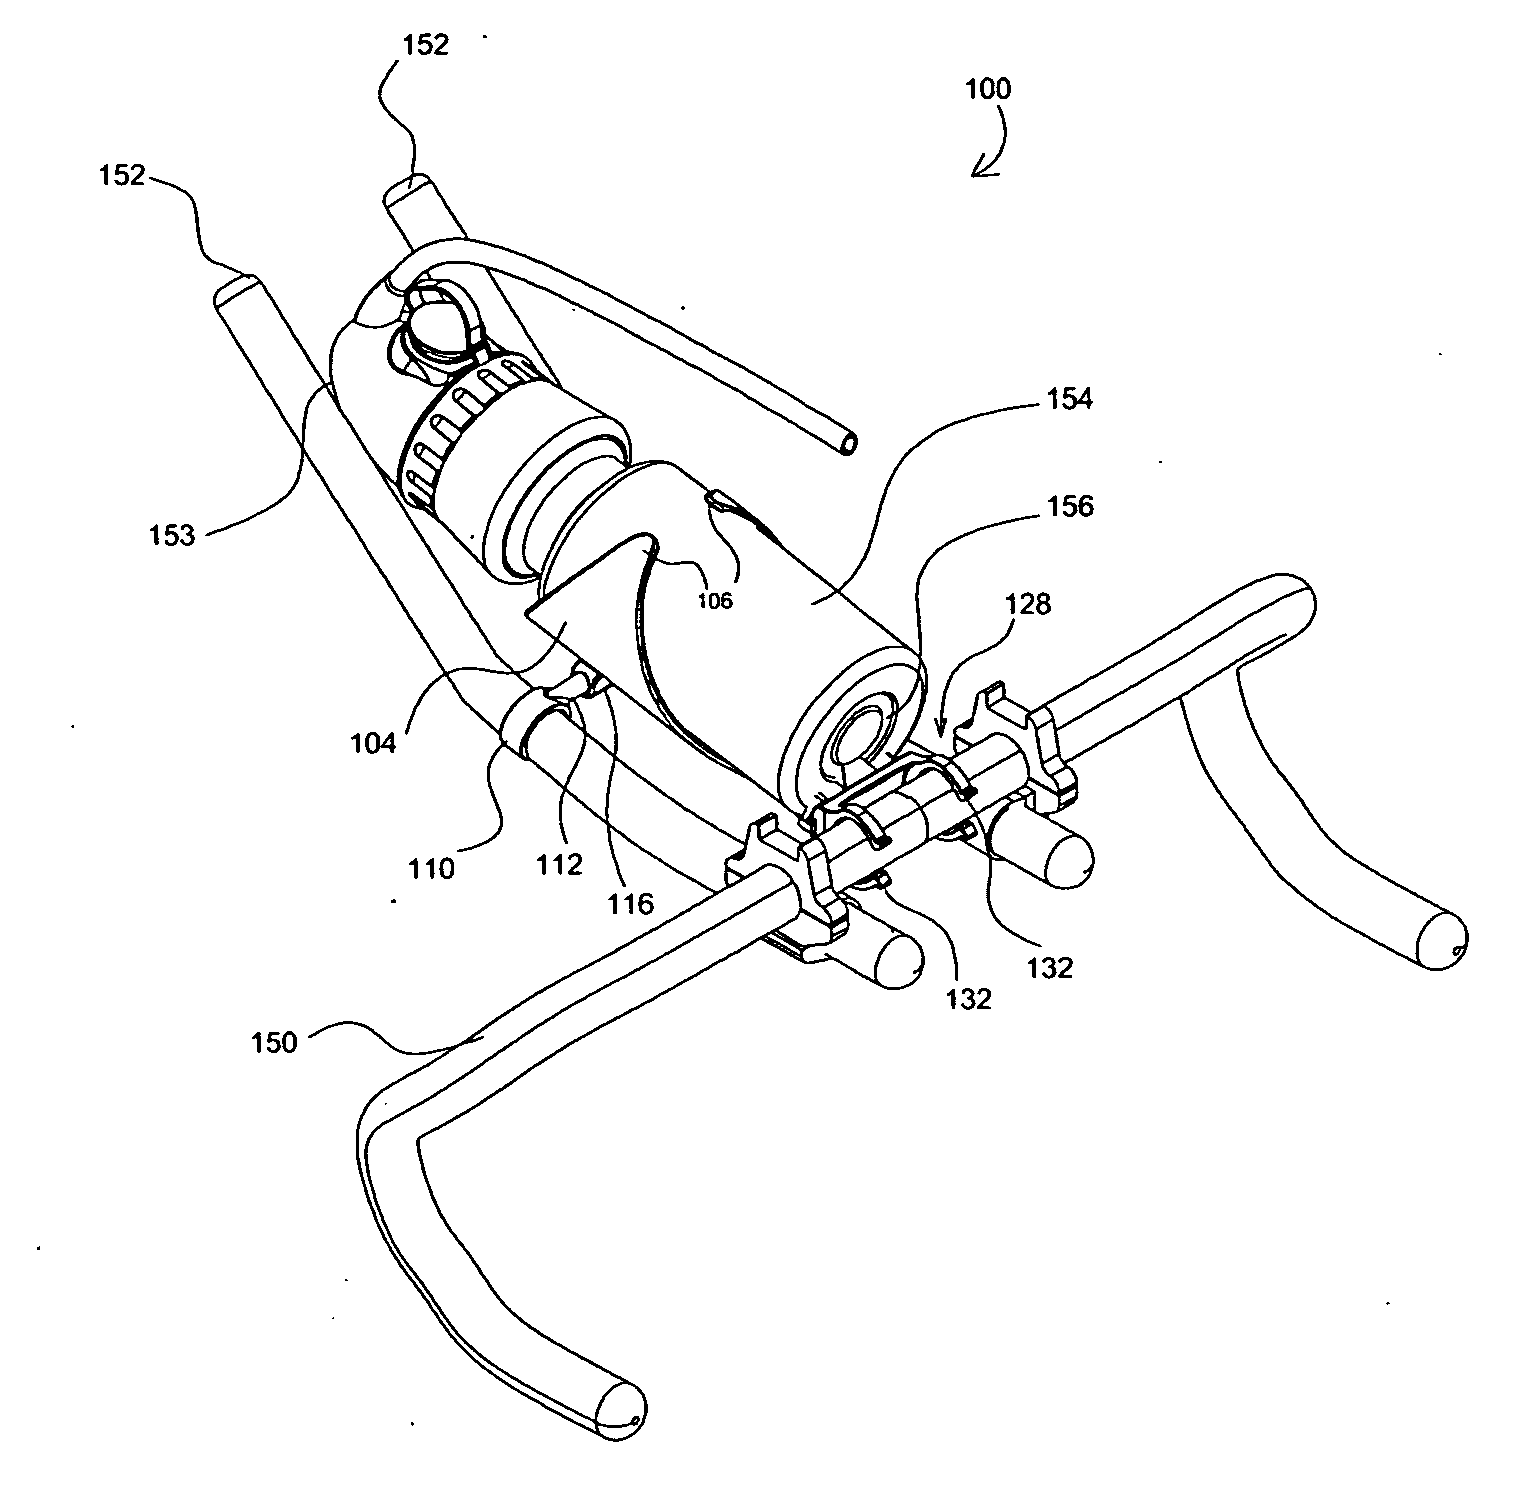 Aerodynamic bottle support cage for bicycles